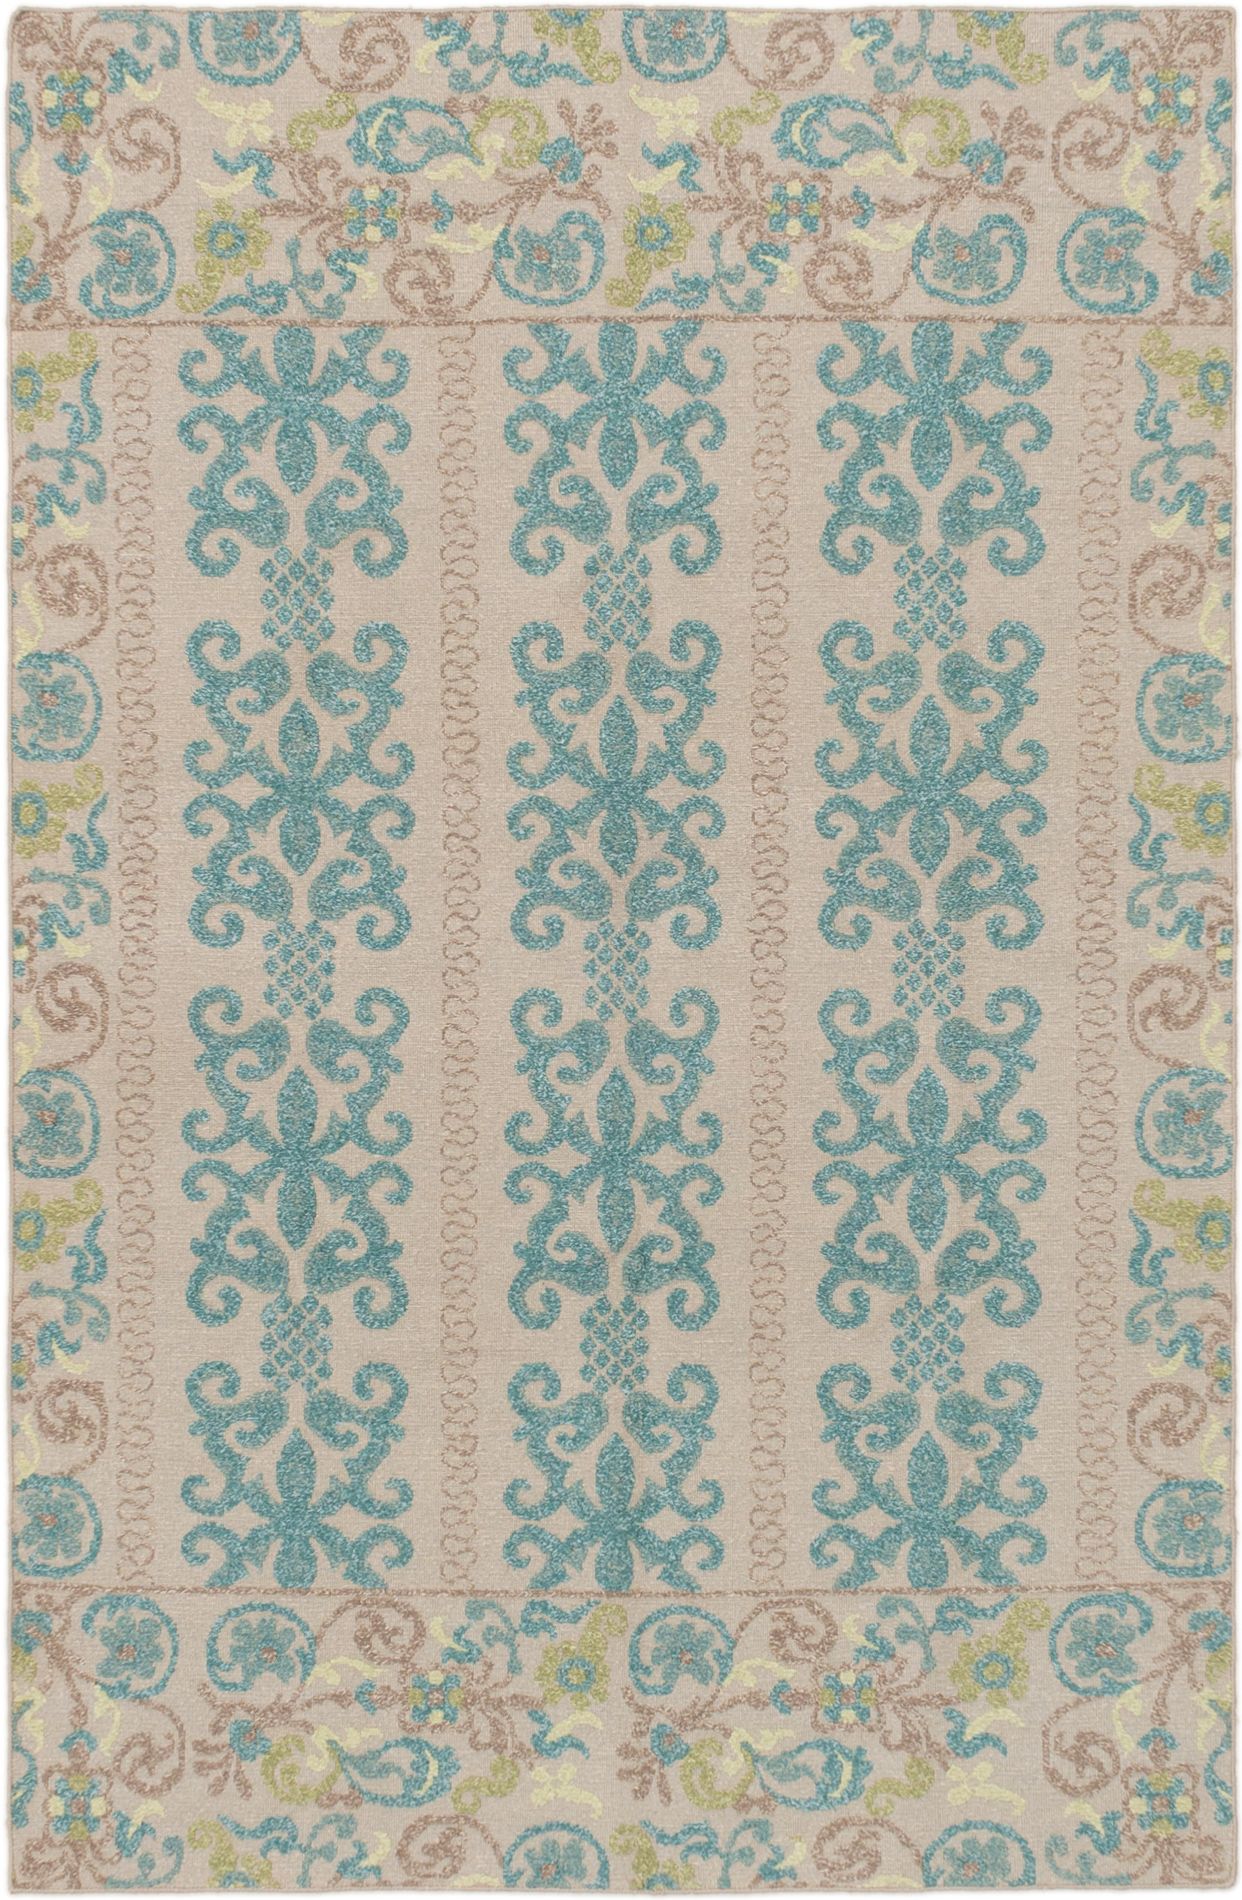 Hand woven Tamar I Teal Wool Tapestry Kilim 5'6" x 8'6" Size: 5'6" x 8'6"  